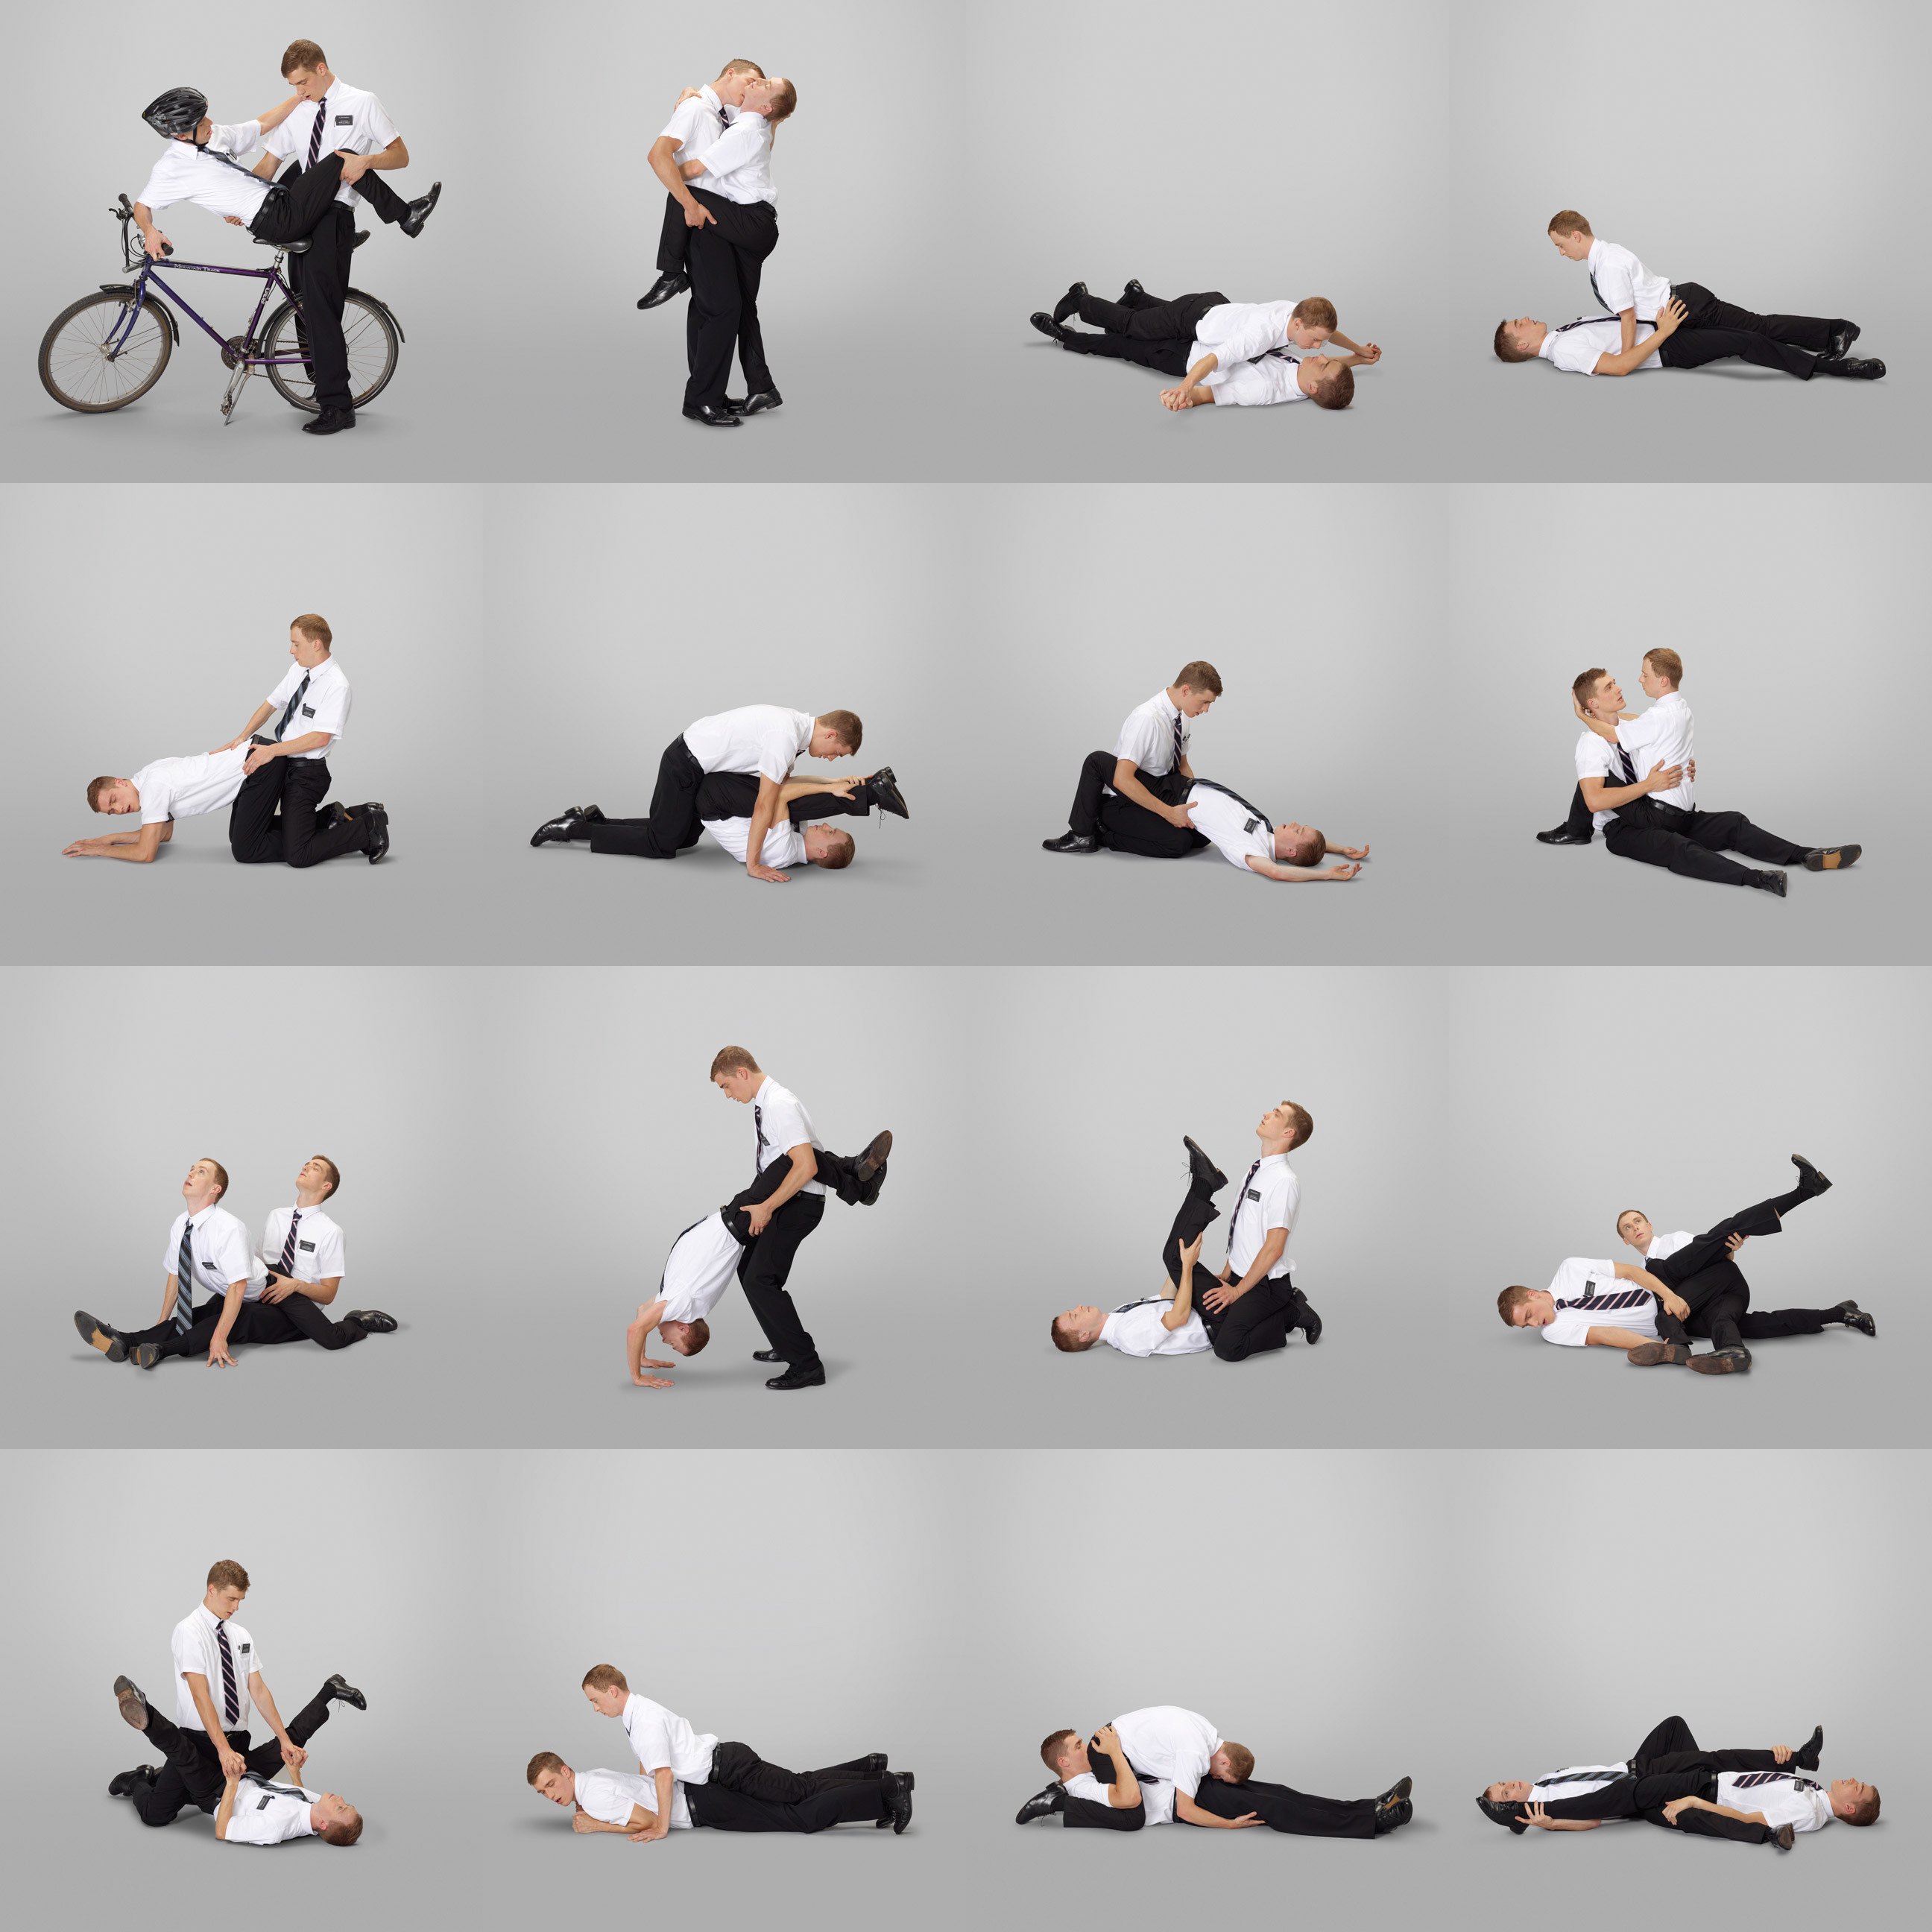 Missionary position show